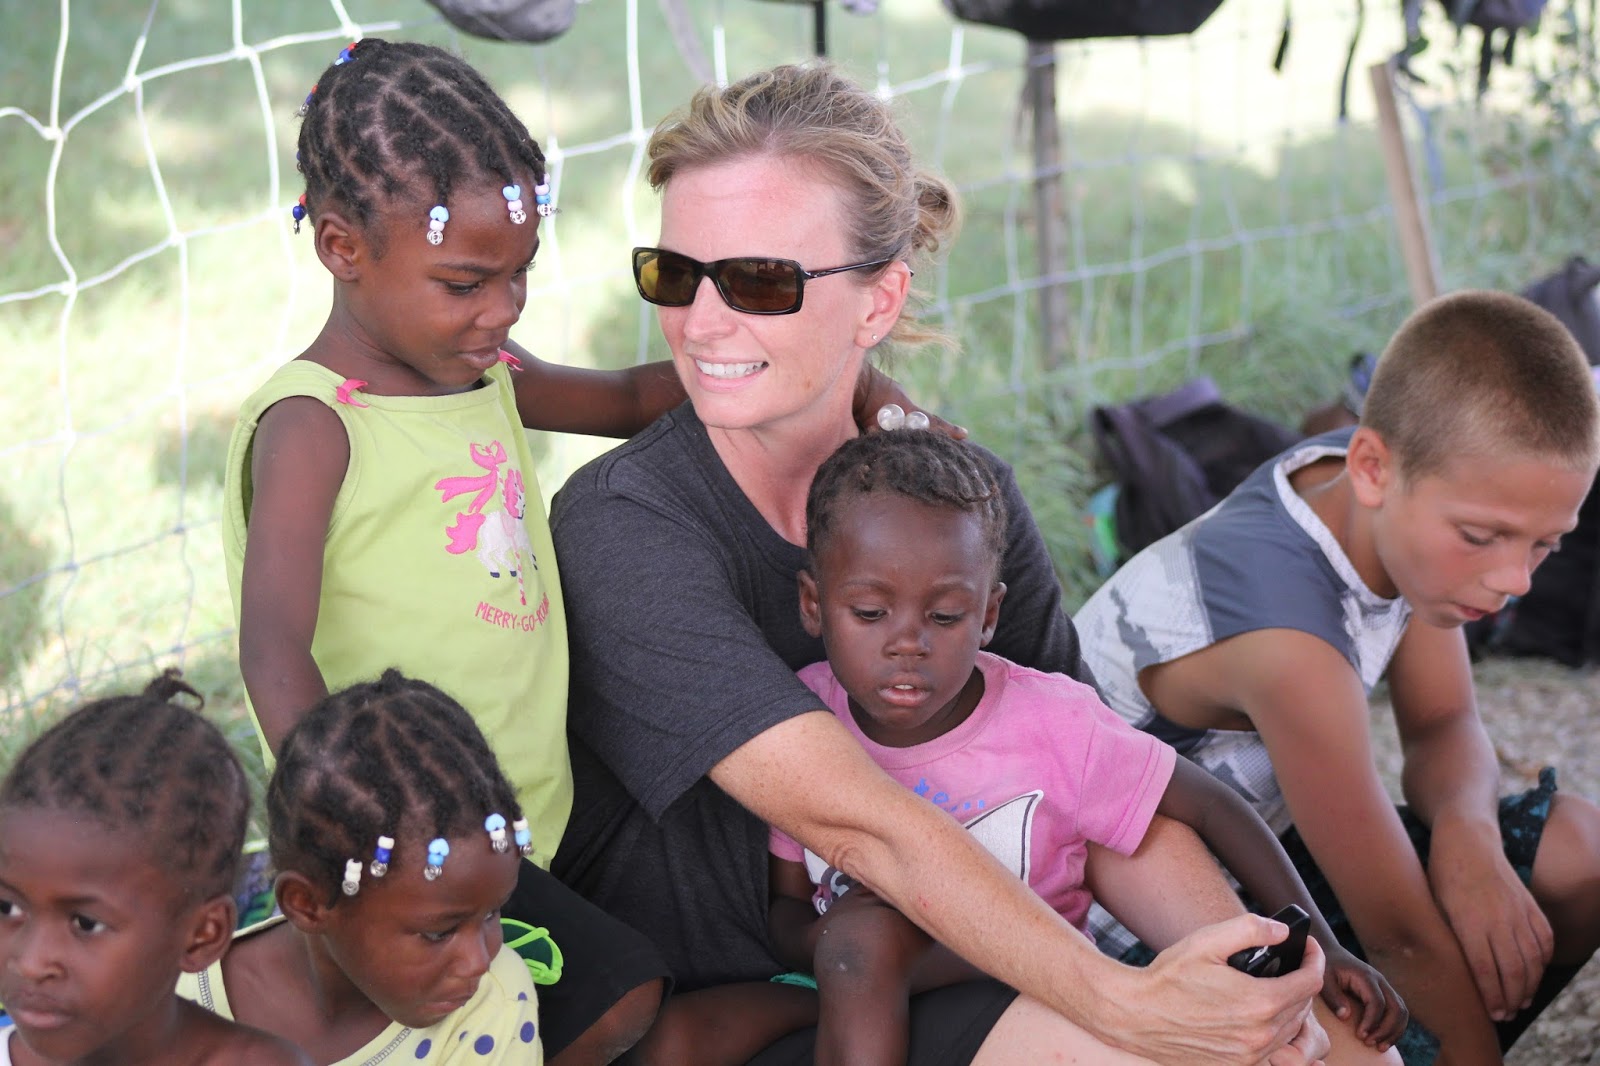 Todd Family Haiti: You just might be living in Haiti if